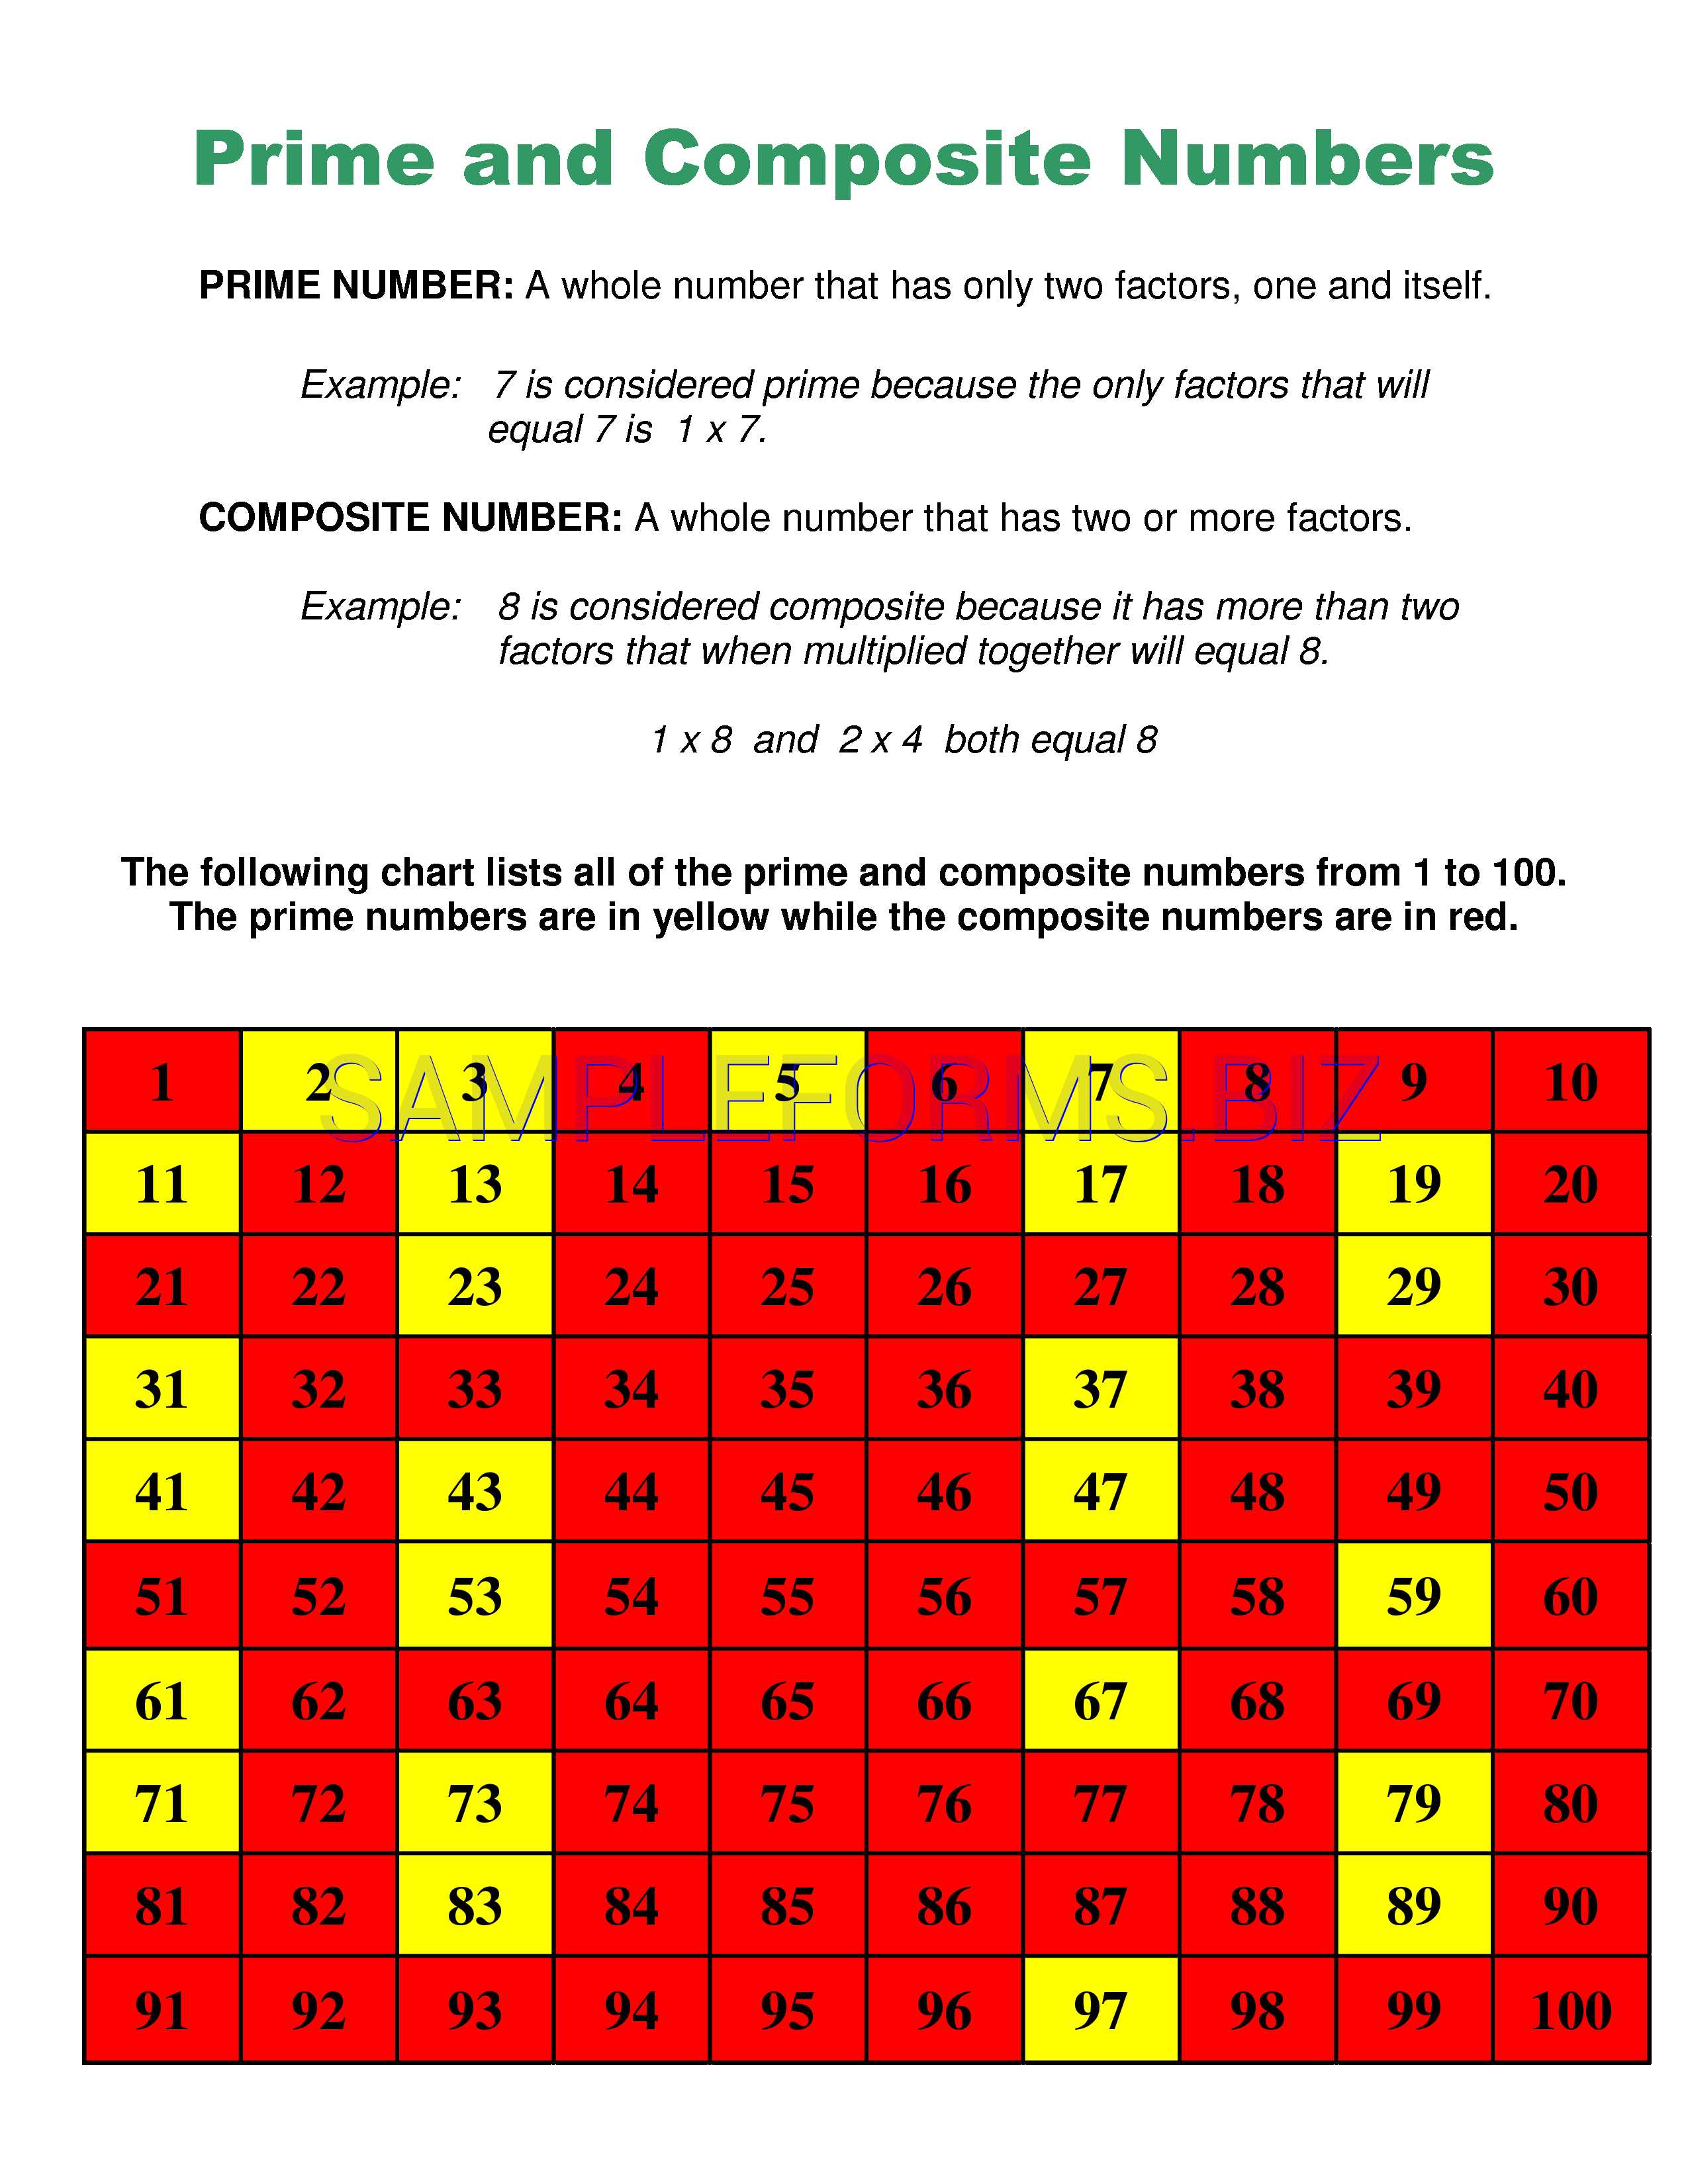 list of prime and composite numbers from 1 to 100